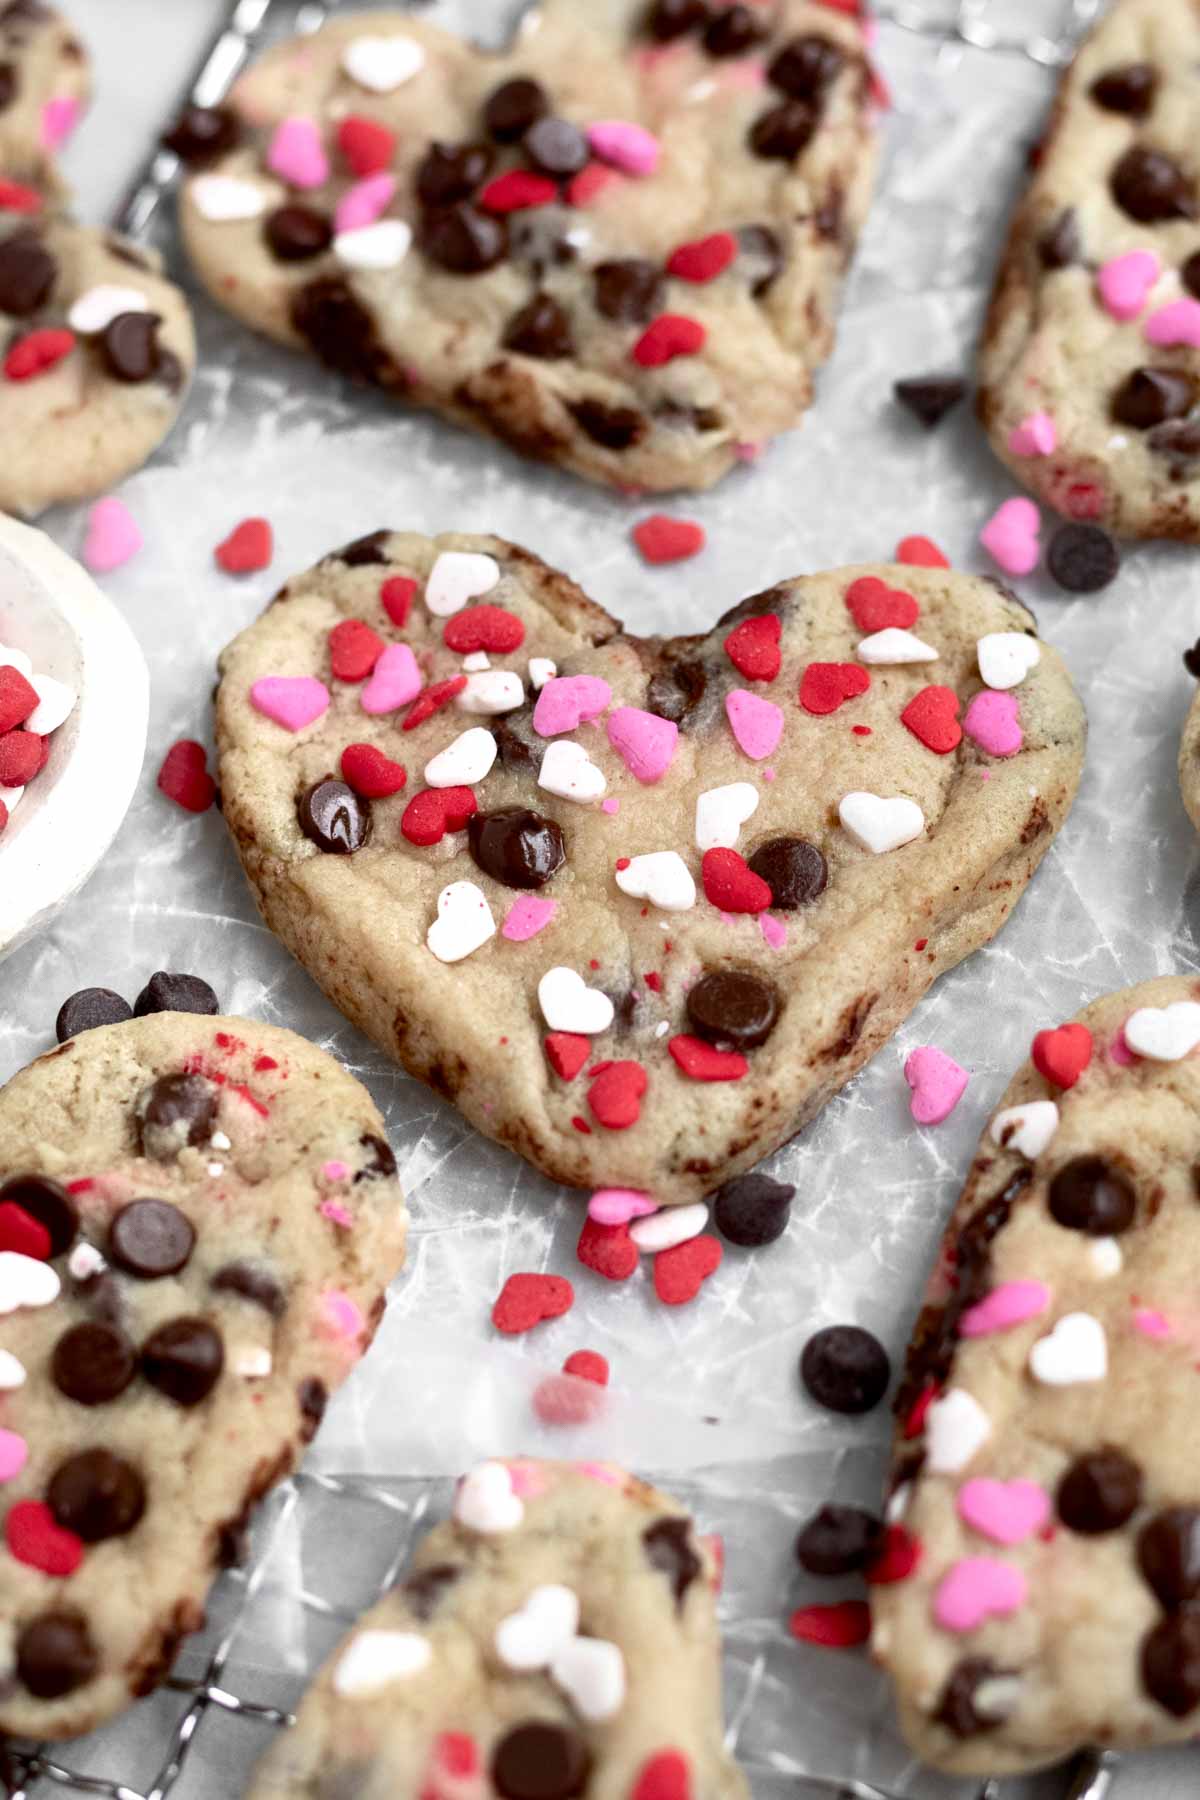 Light golden soft cookies in the shape of a heart with chocolate chips and heart sprinkles.